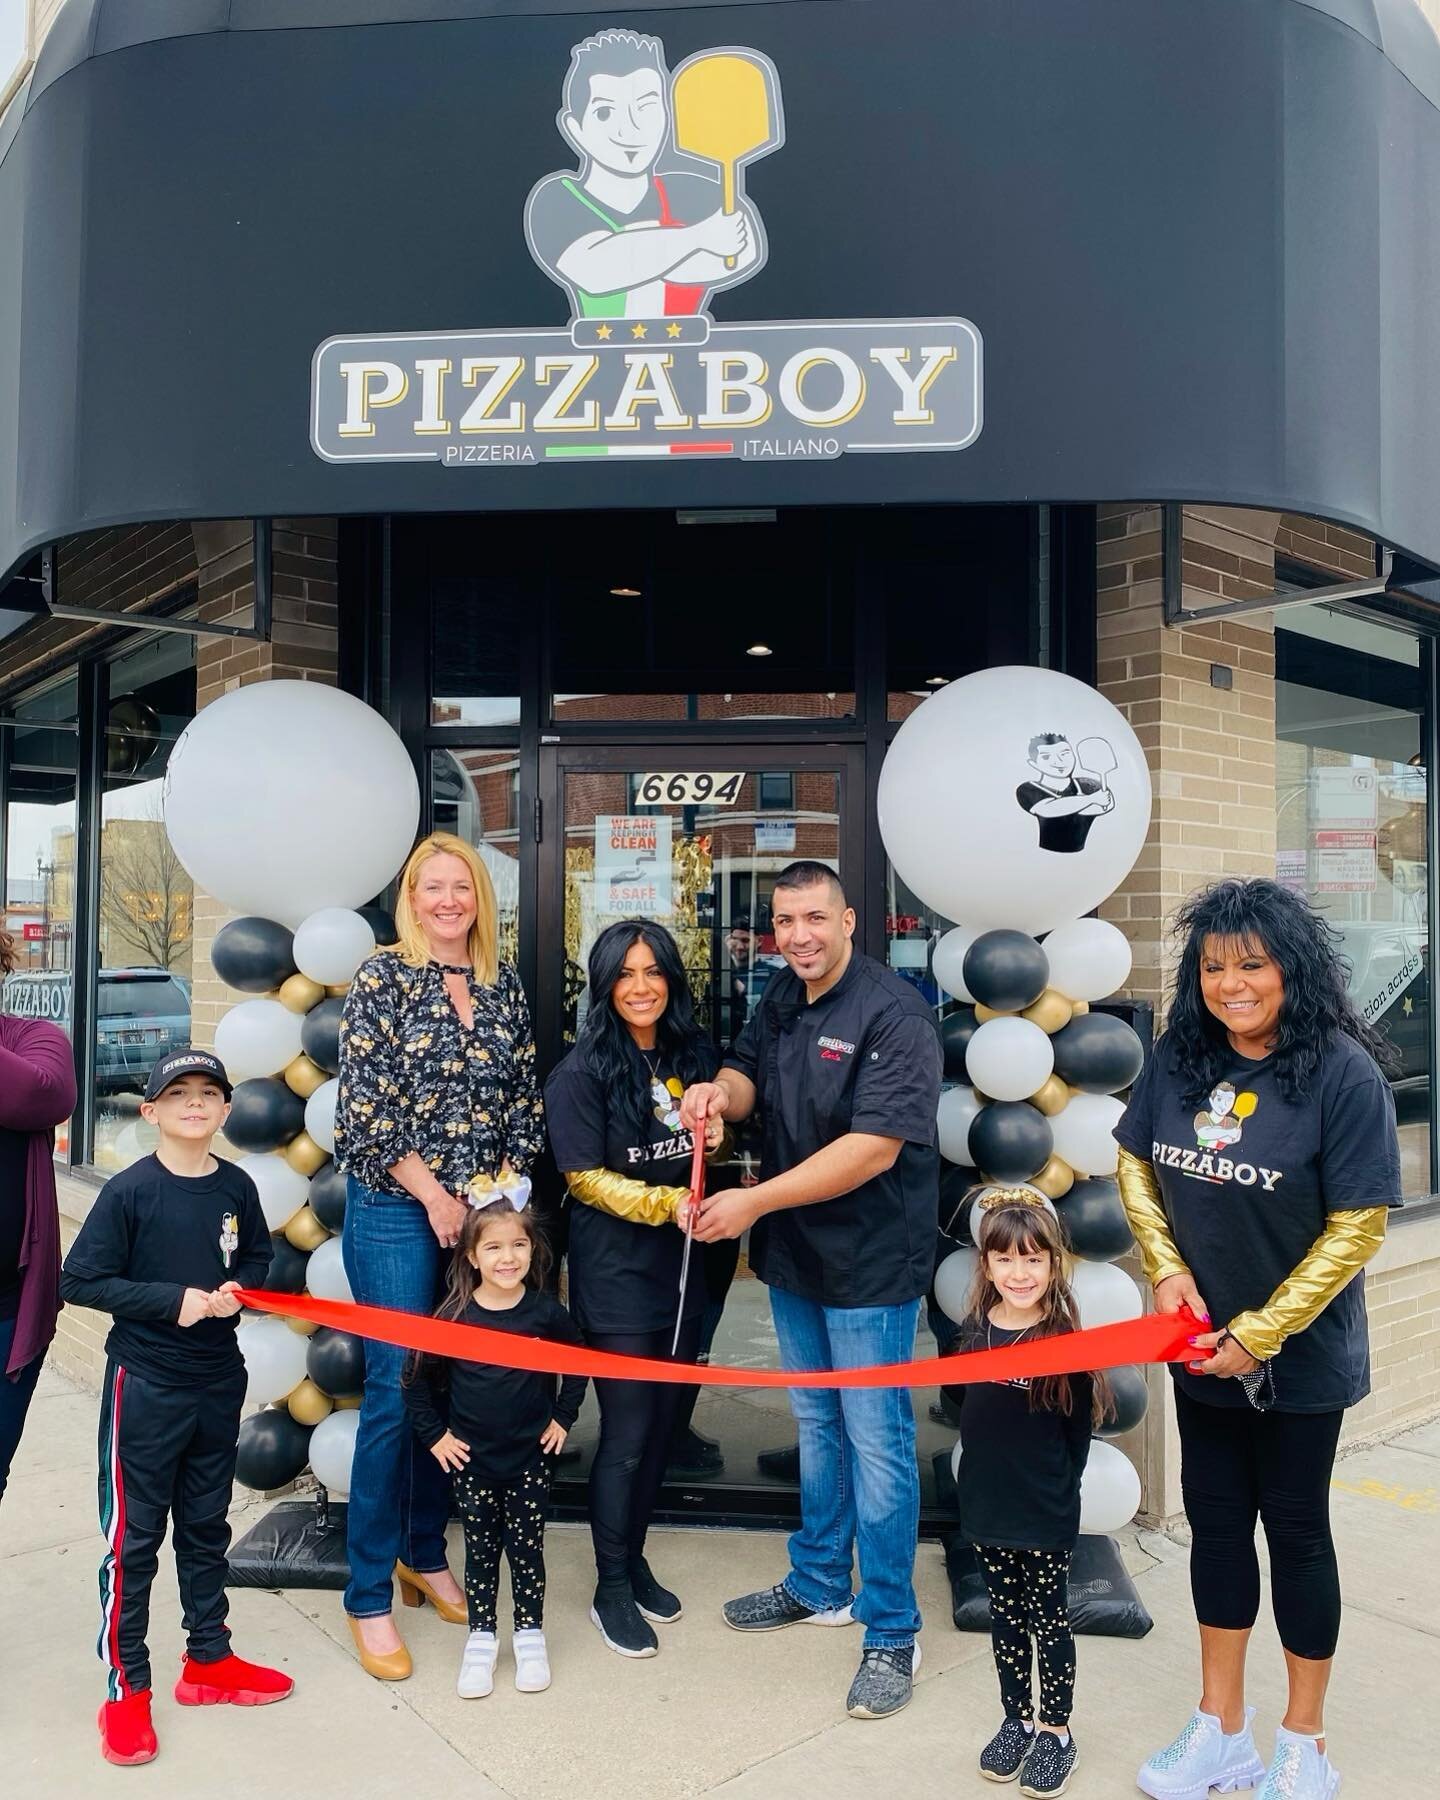 A day to remember as we are welcomed into the great neighborhood of #edisonpark @edisonparkchicago !!!! Look forward to bringing some delicious food and a fresh new vibe to OUR KIND OF TOWN CHICAGGGGGOOO!!!!!

-
-
 ⭐️⭐️⭐️💚🤍❤️⭐️⭐️⭐️
 @pizzaboychicag